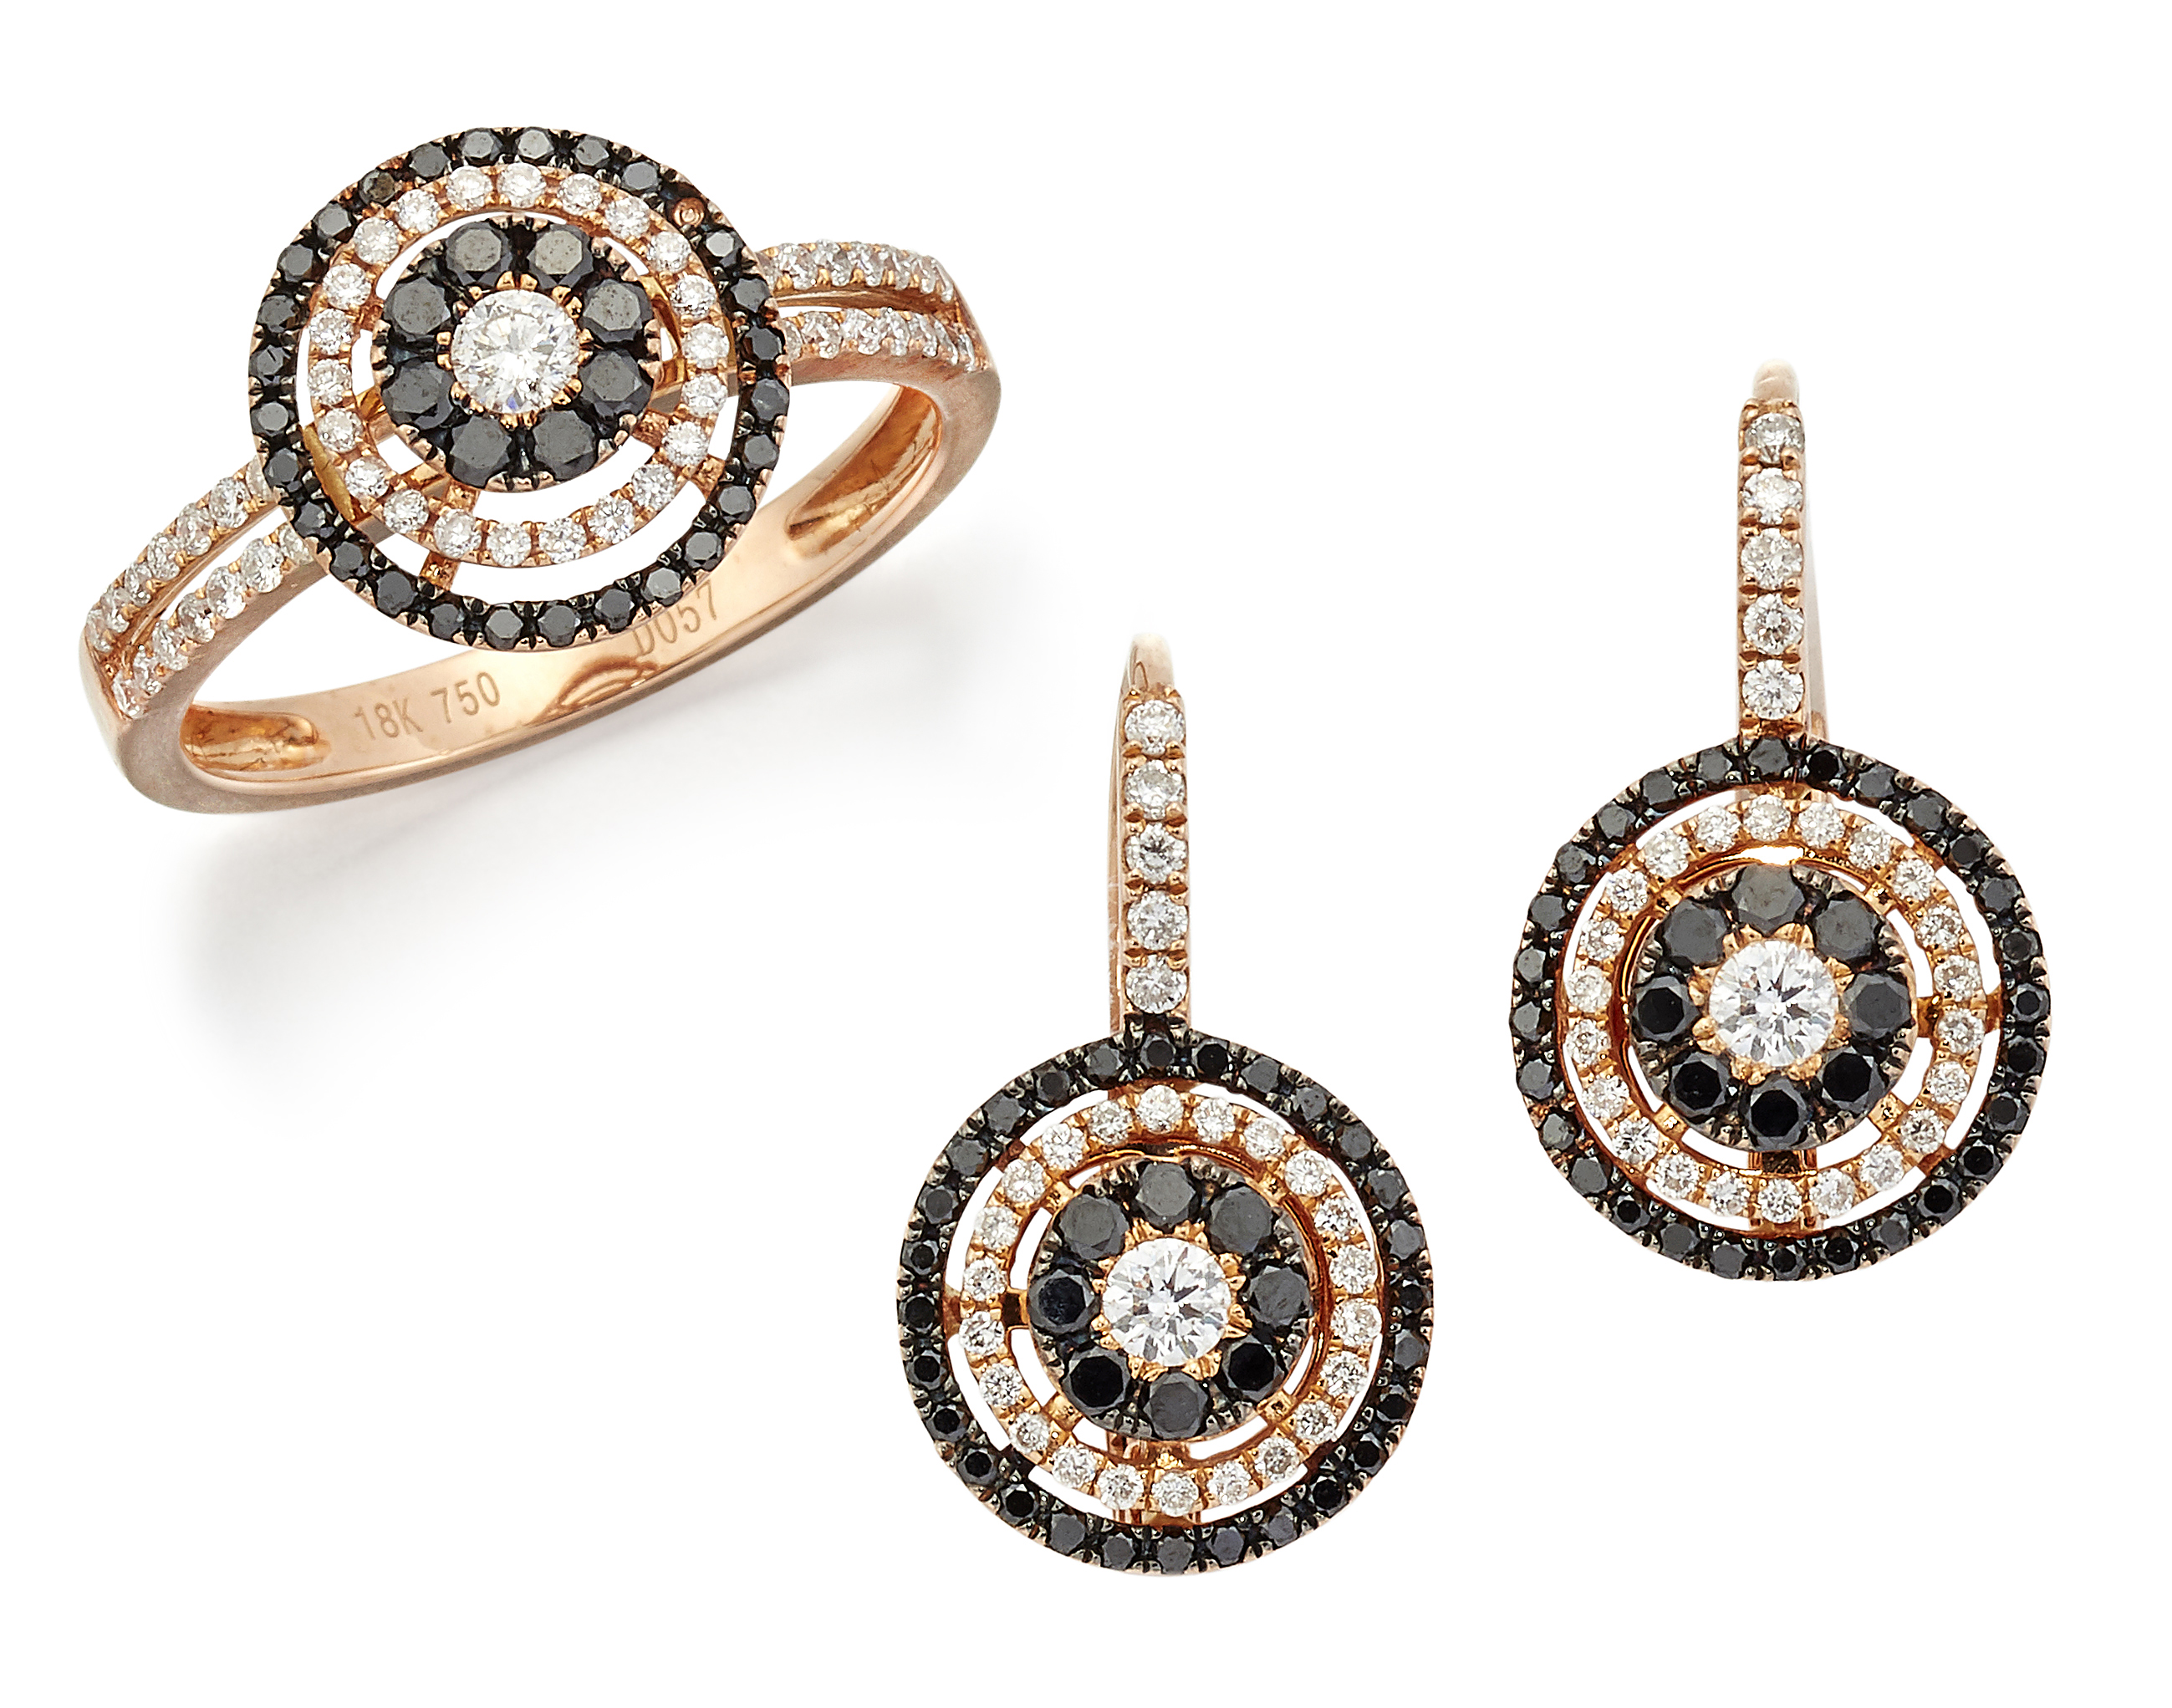 A DIAMOND RING AND EARRING SUITE